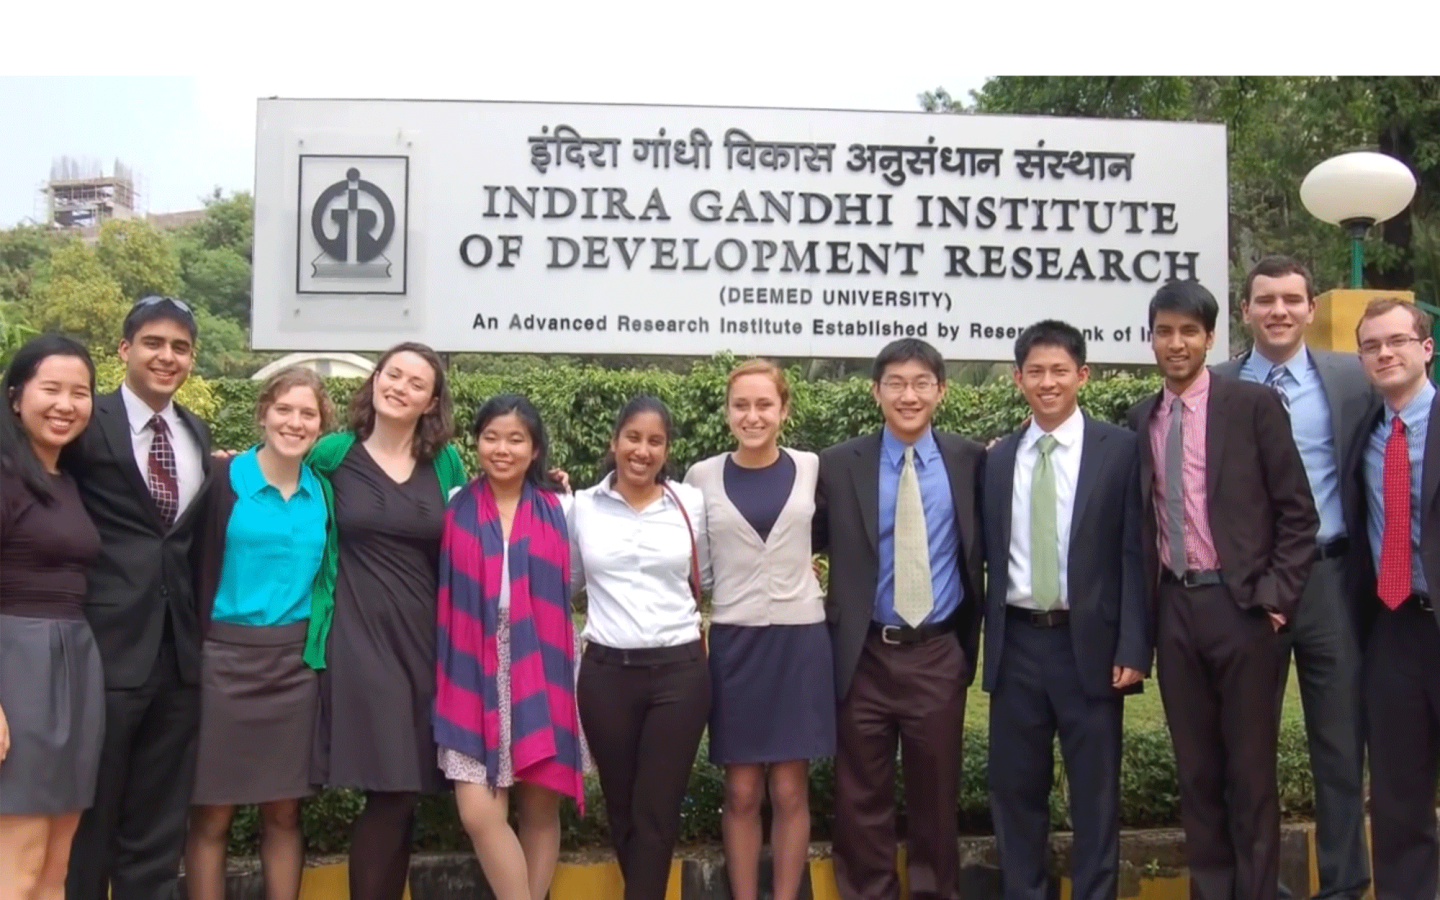 Dartmouth students in front of Indira Gandhi Institute of Development Research